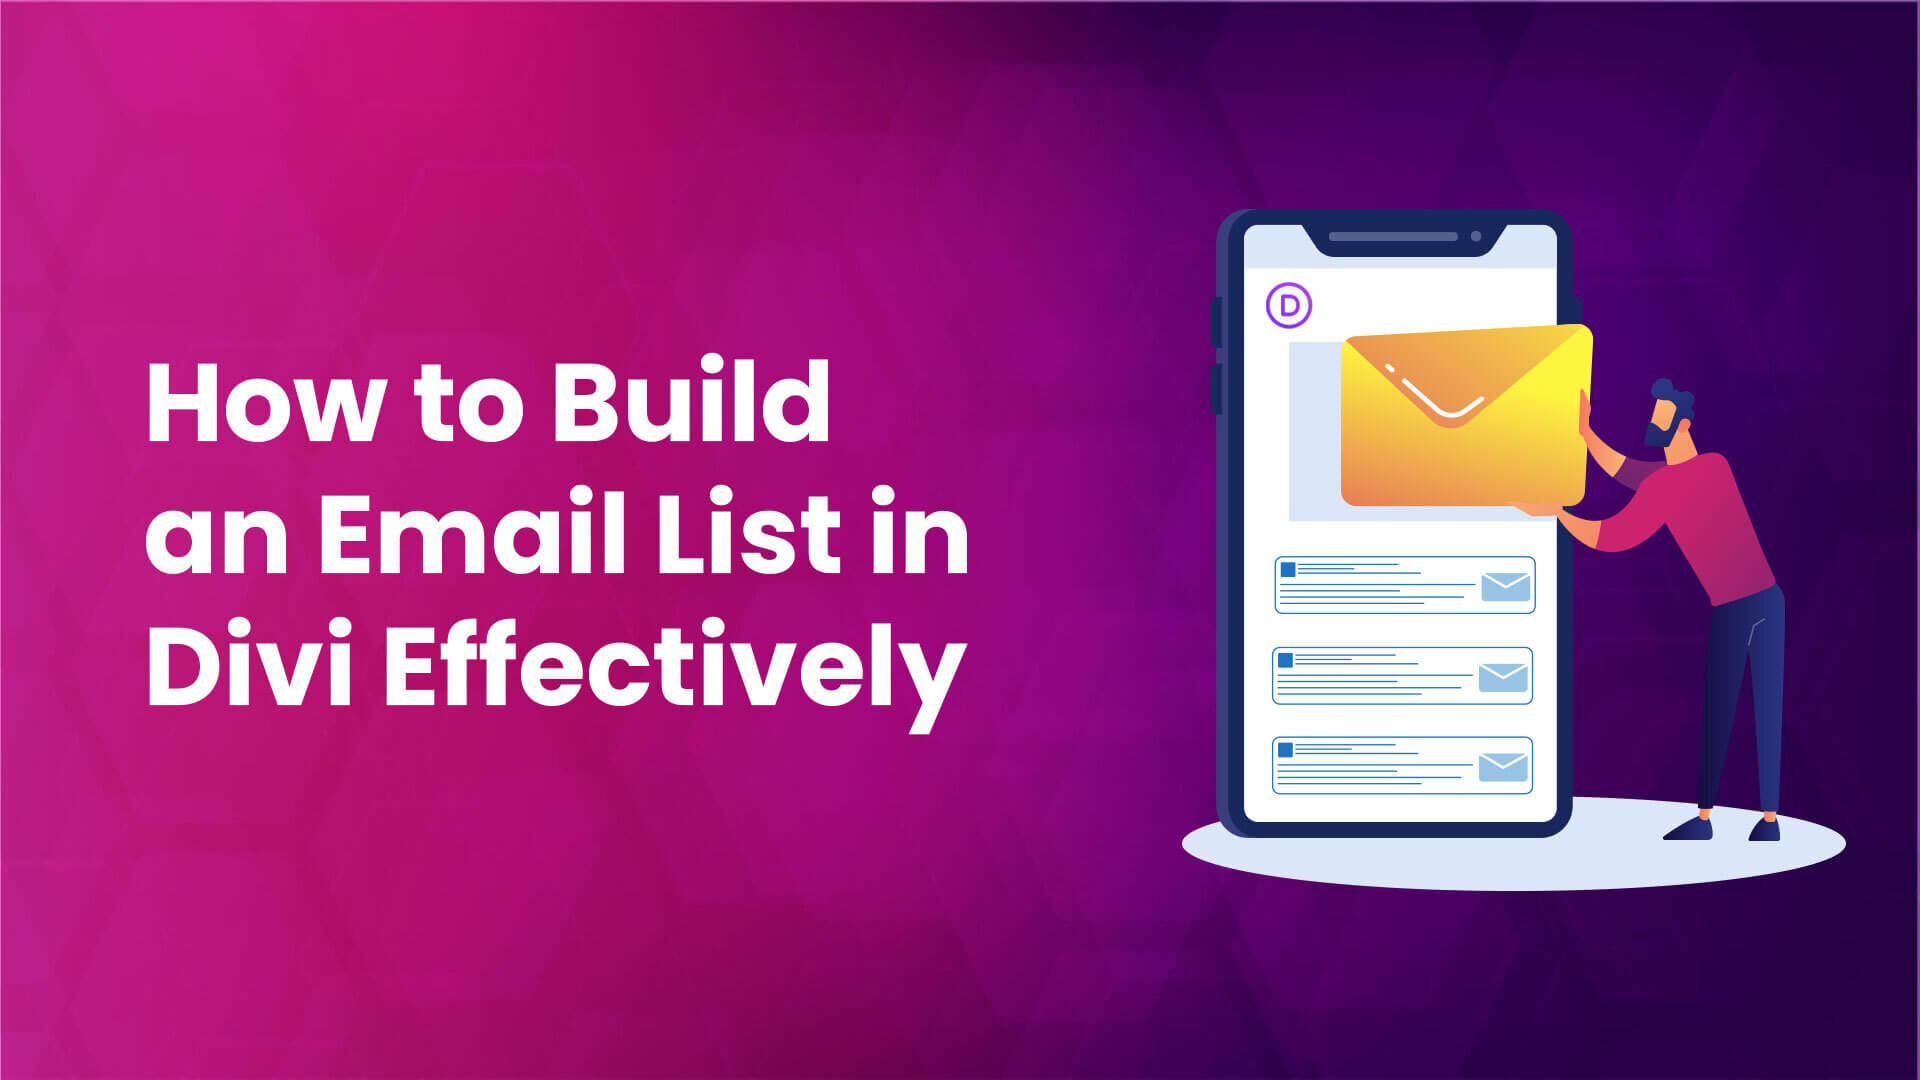 How to Build an Email List in Divi Effectively